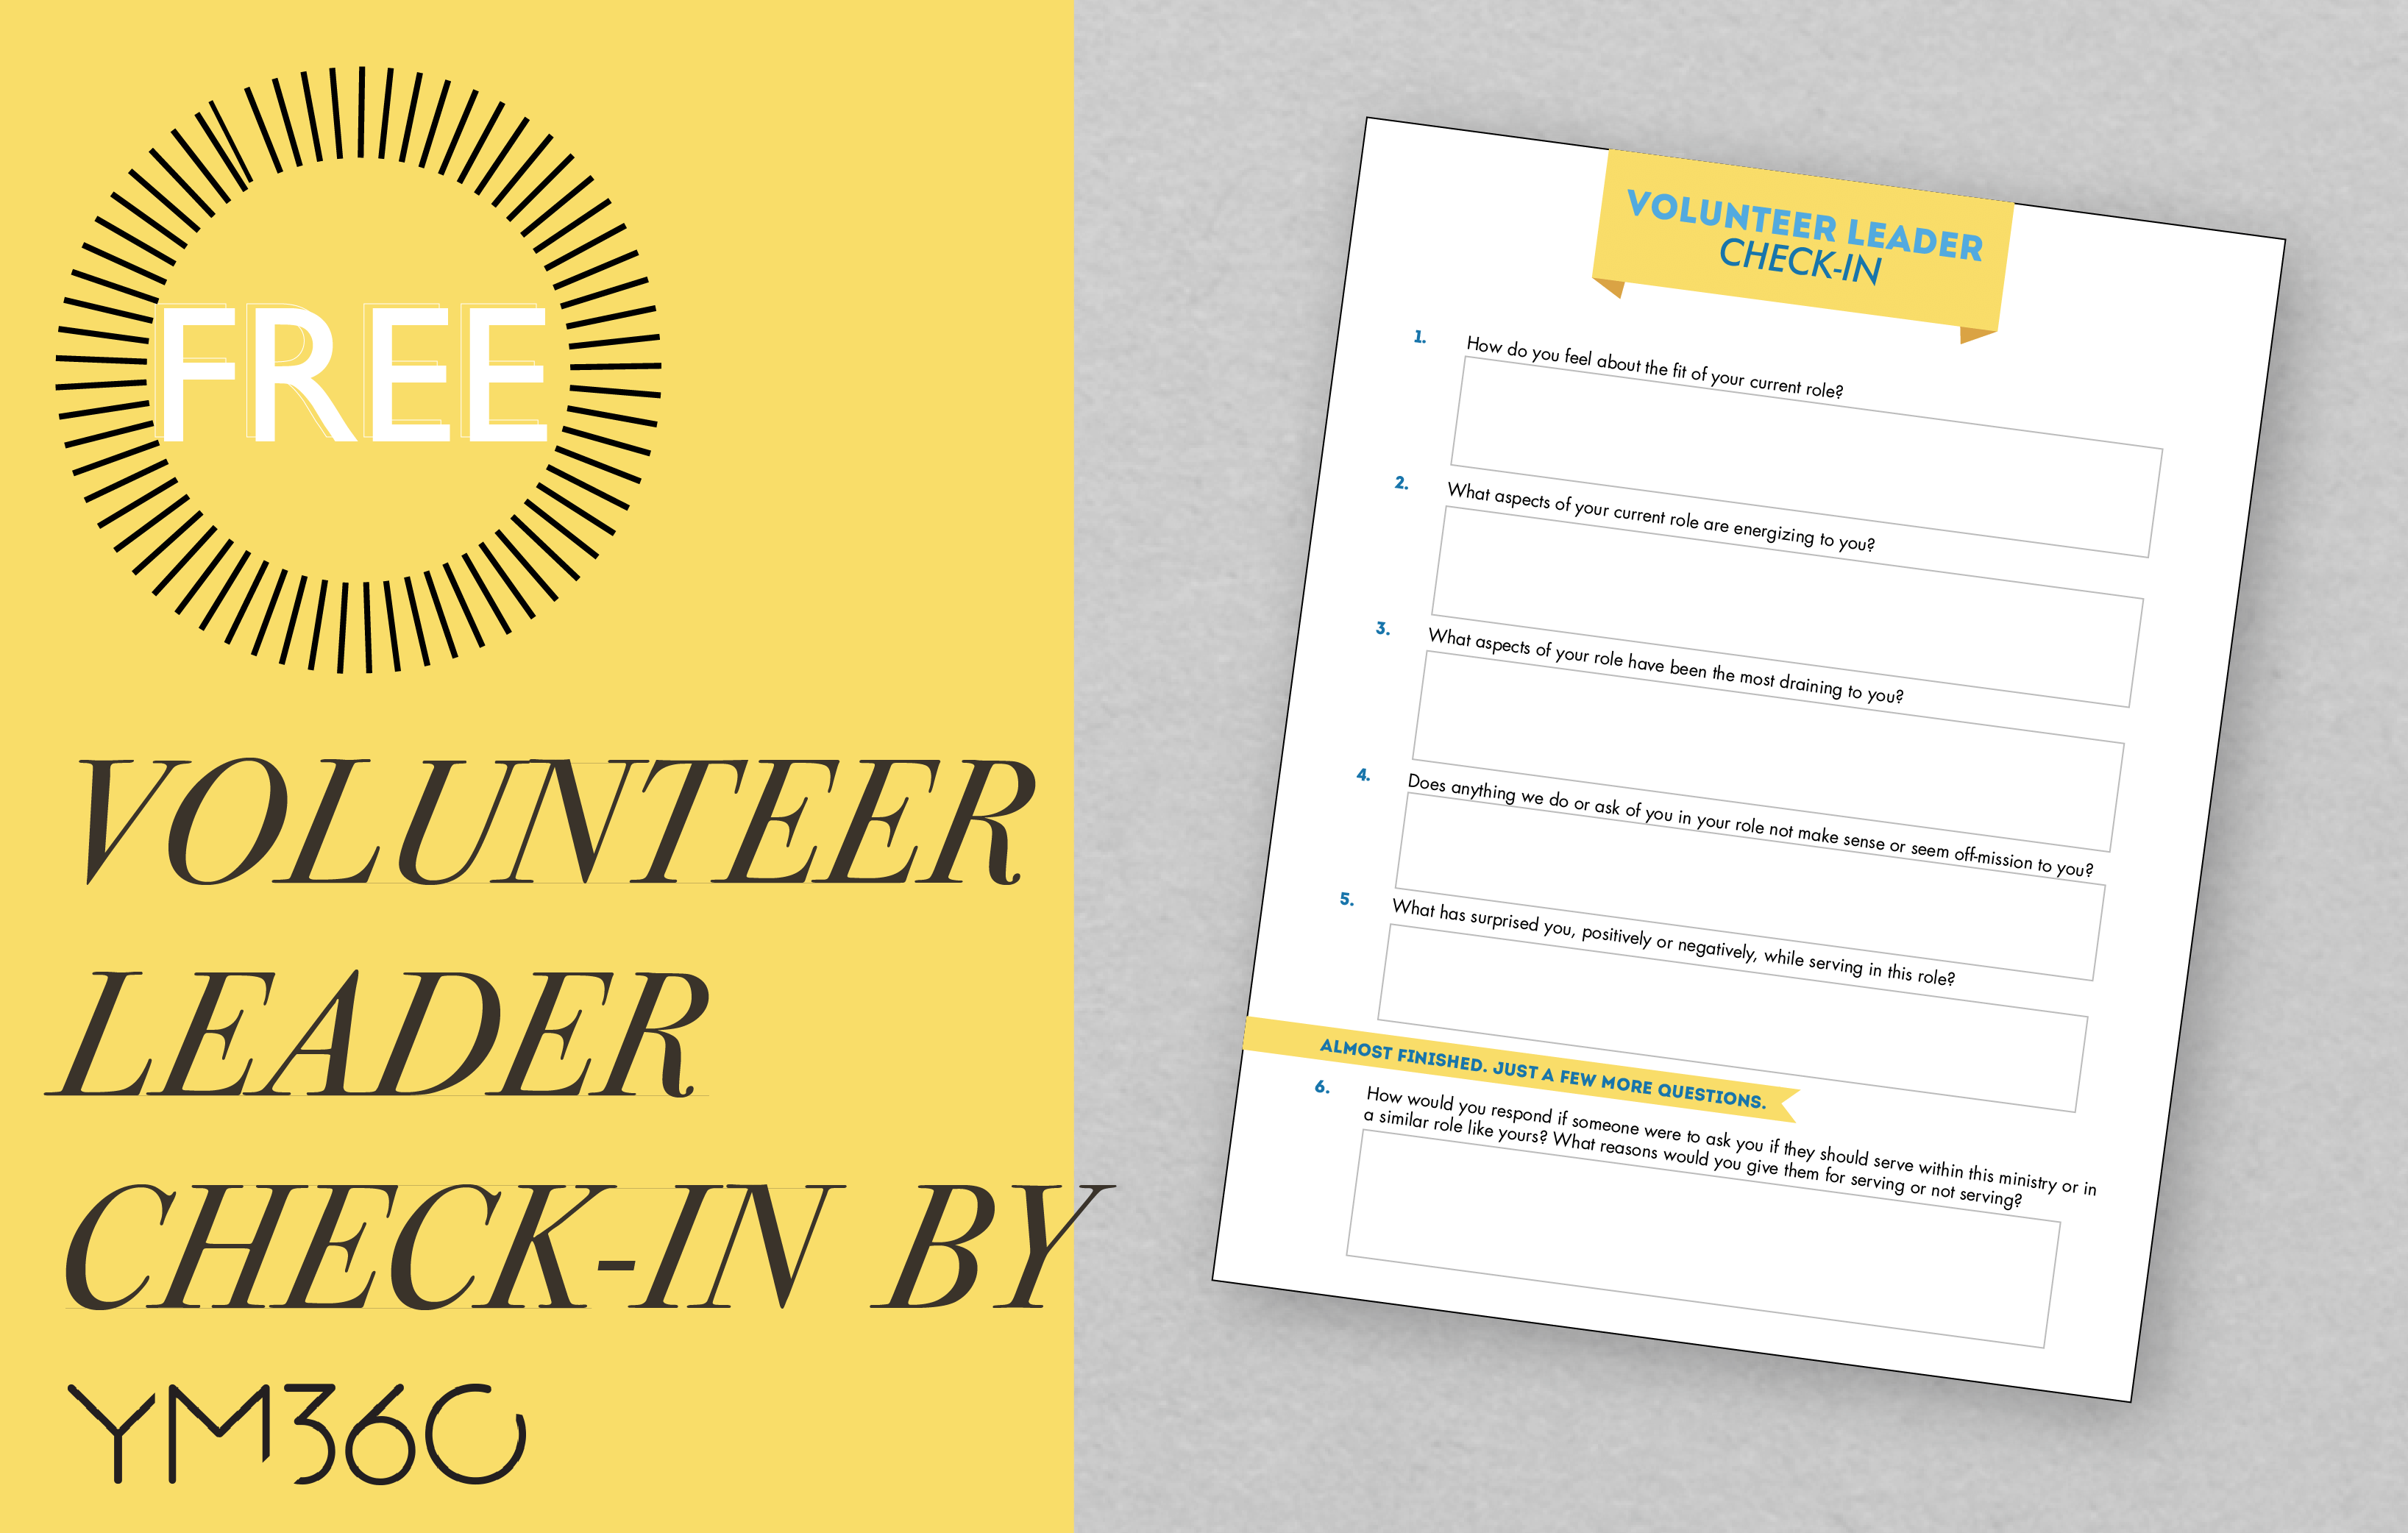 Volunteer Leader "Check-In" Questionnaire